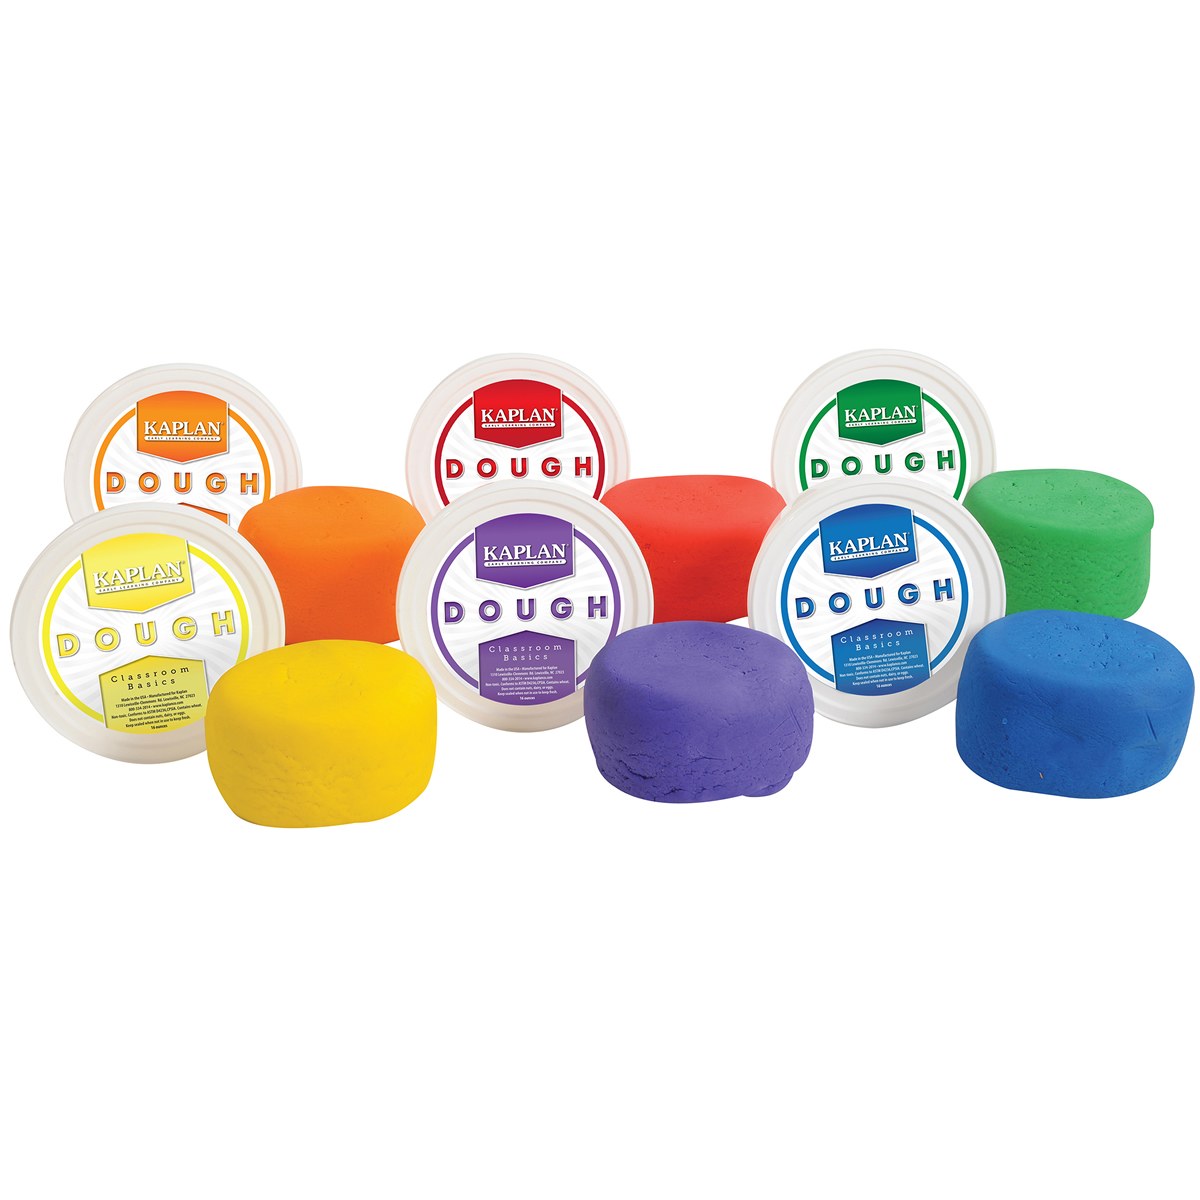 Kaplan Early Learning Company Kaplan Dough Classic Colors - 1 lb Containers - Set of 6